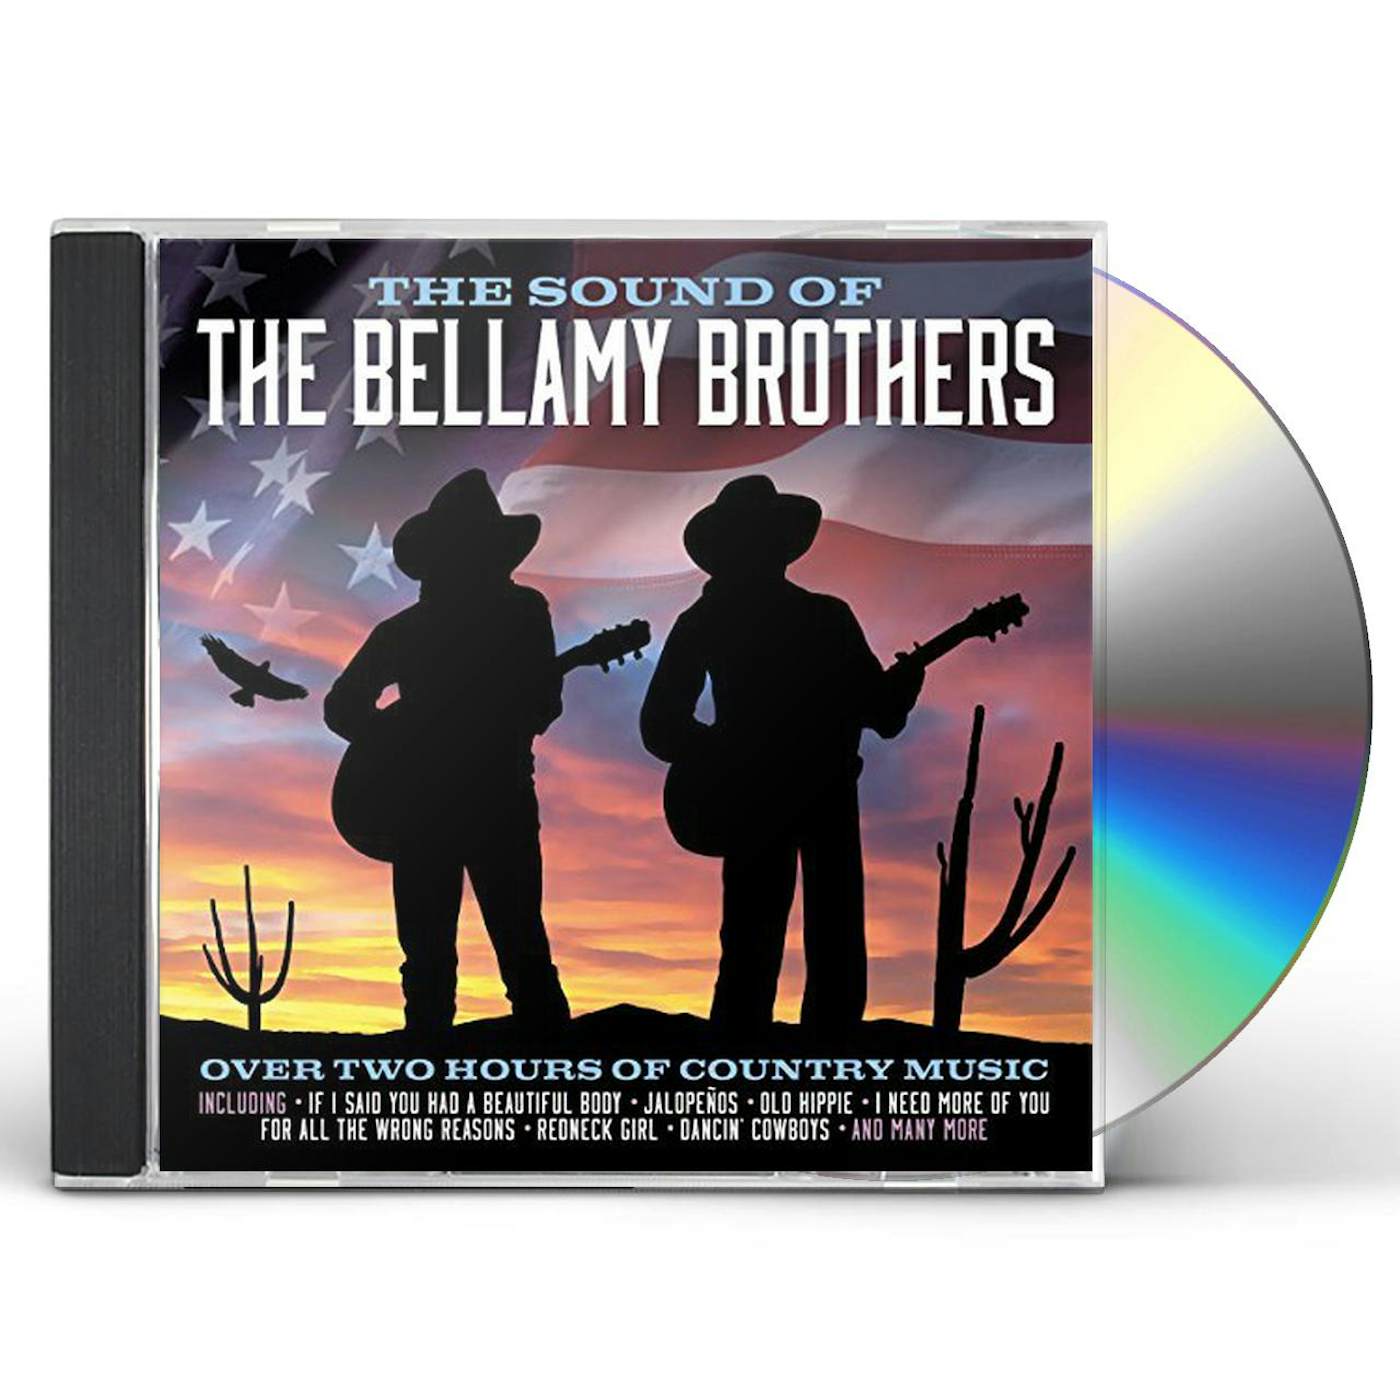 The Bellamy Brothers SOUND OF CD